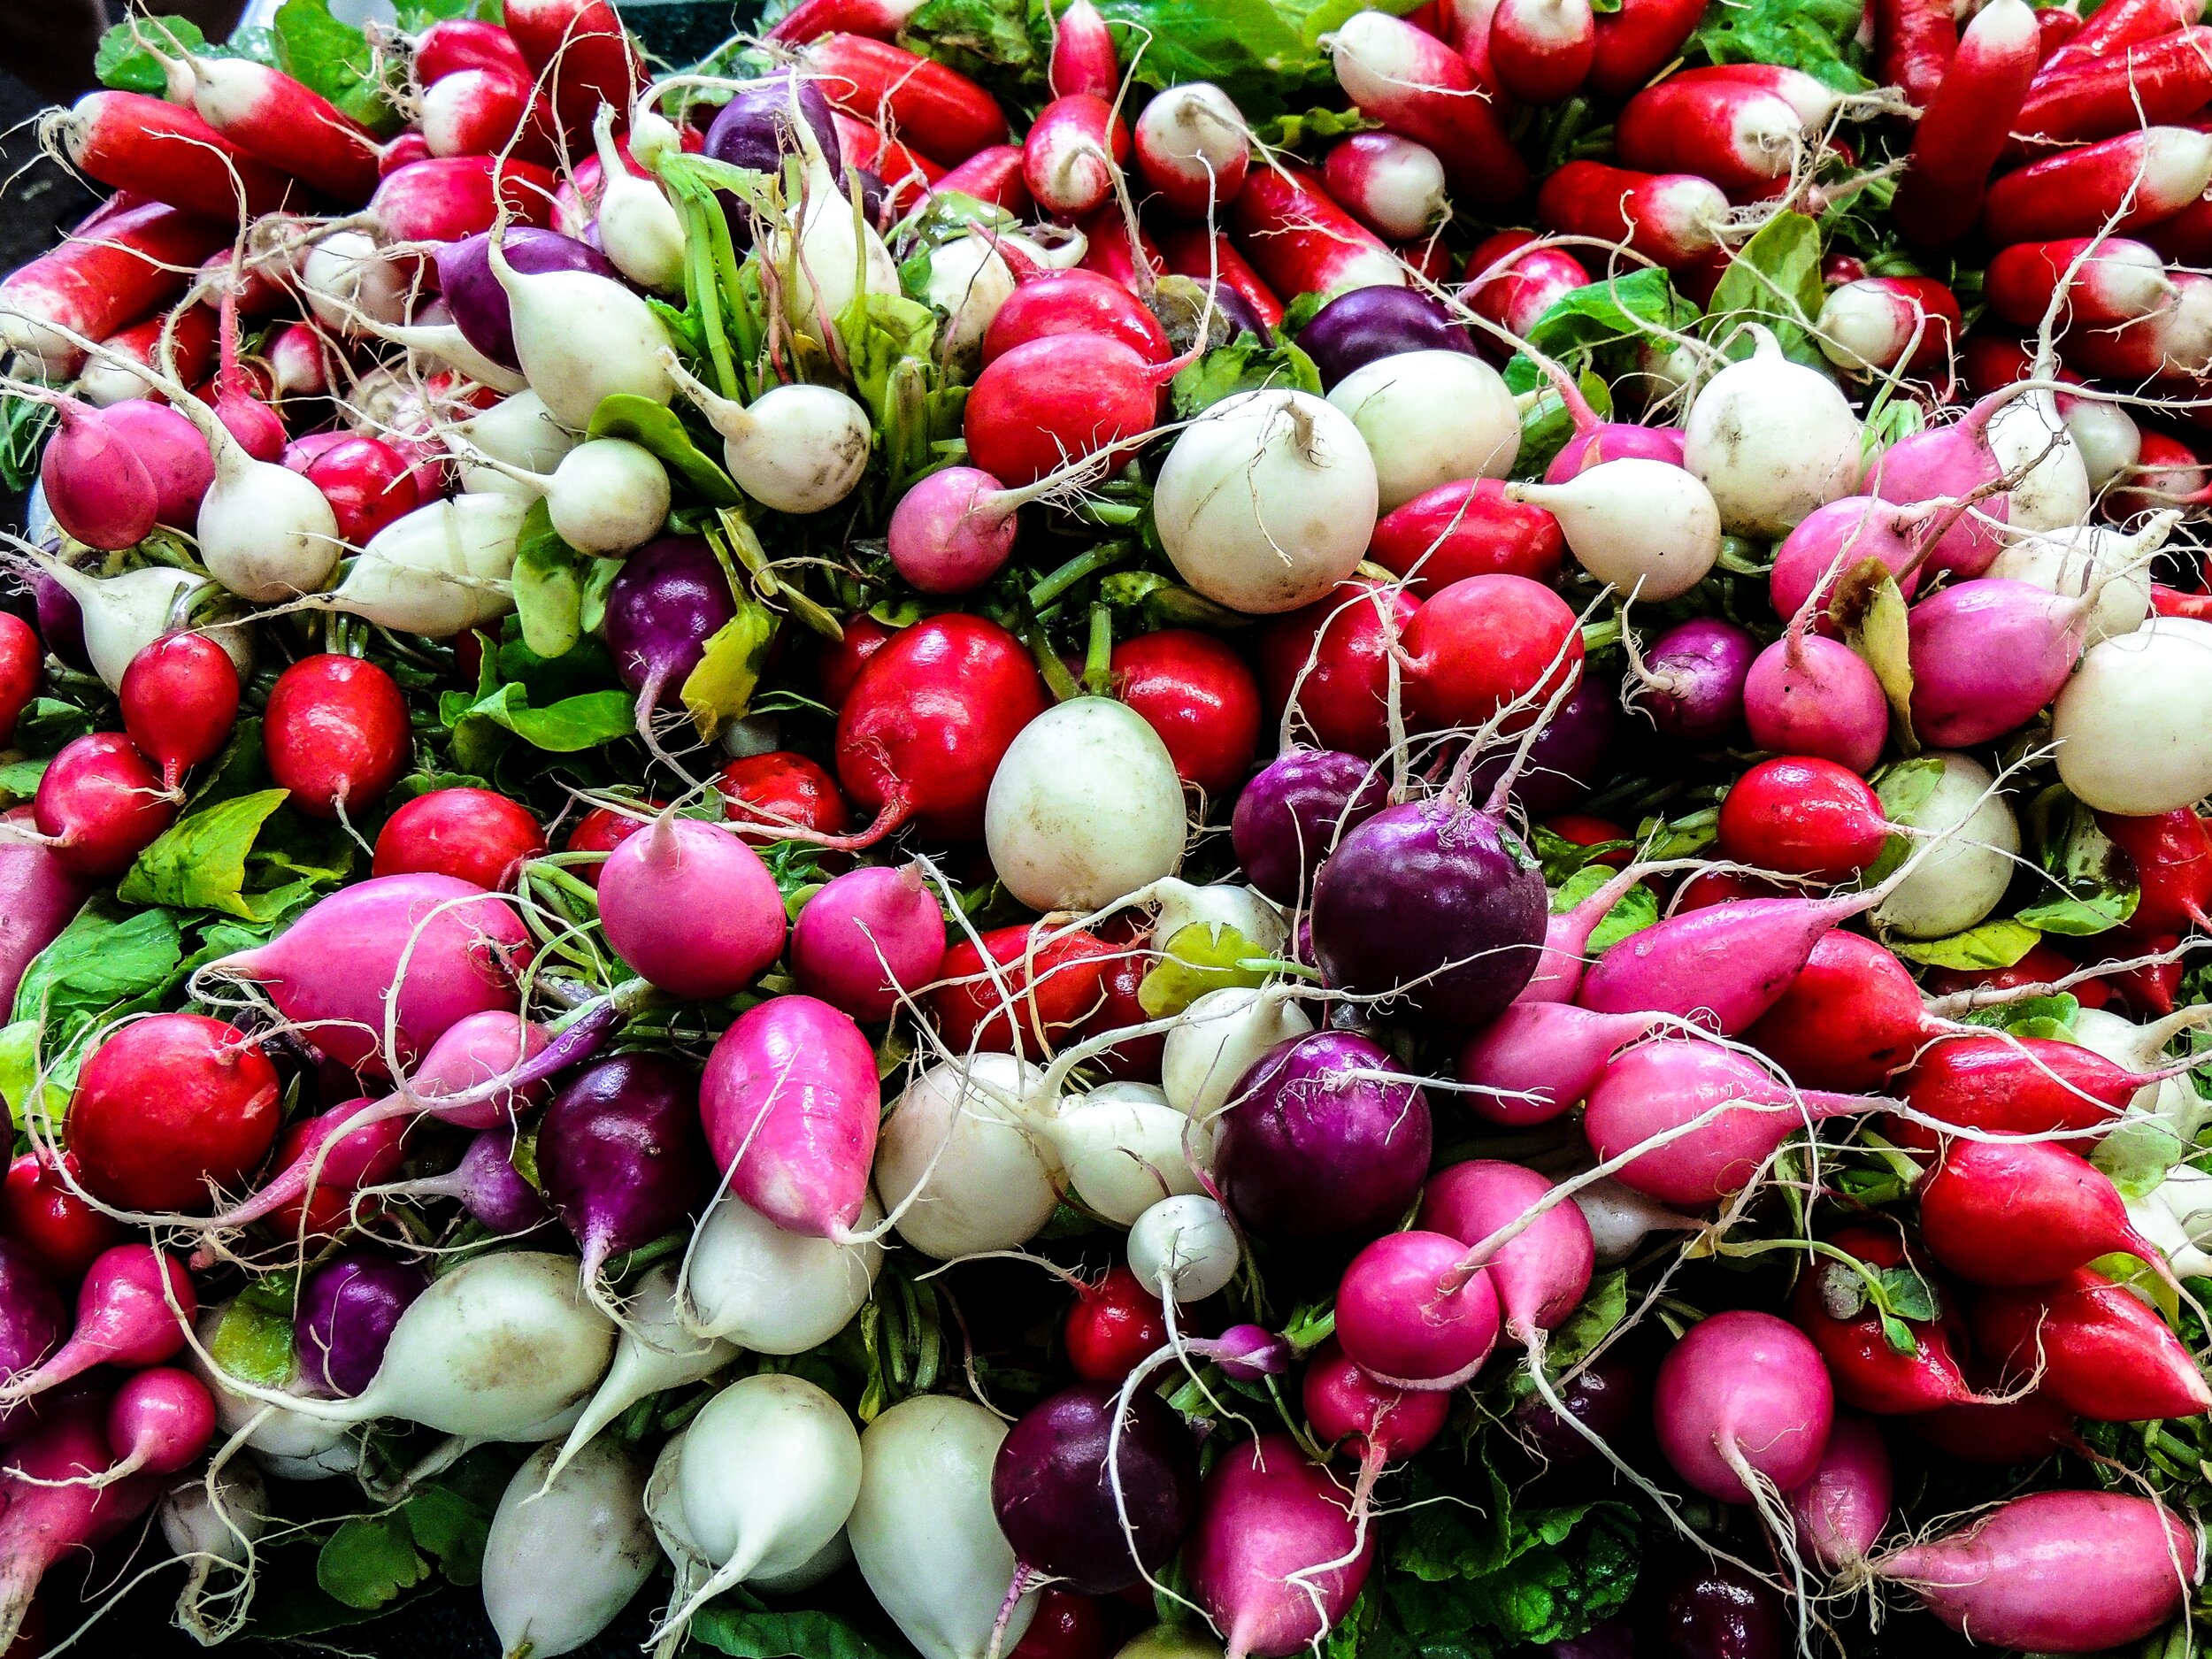 A beautiful array of radishes. Photo by Philippe Collard